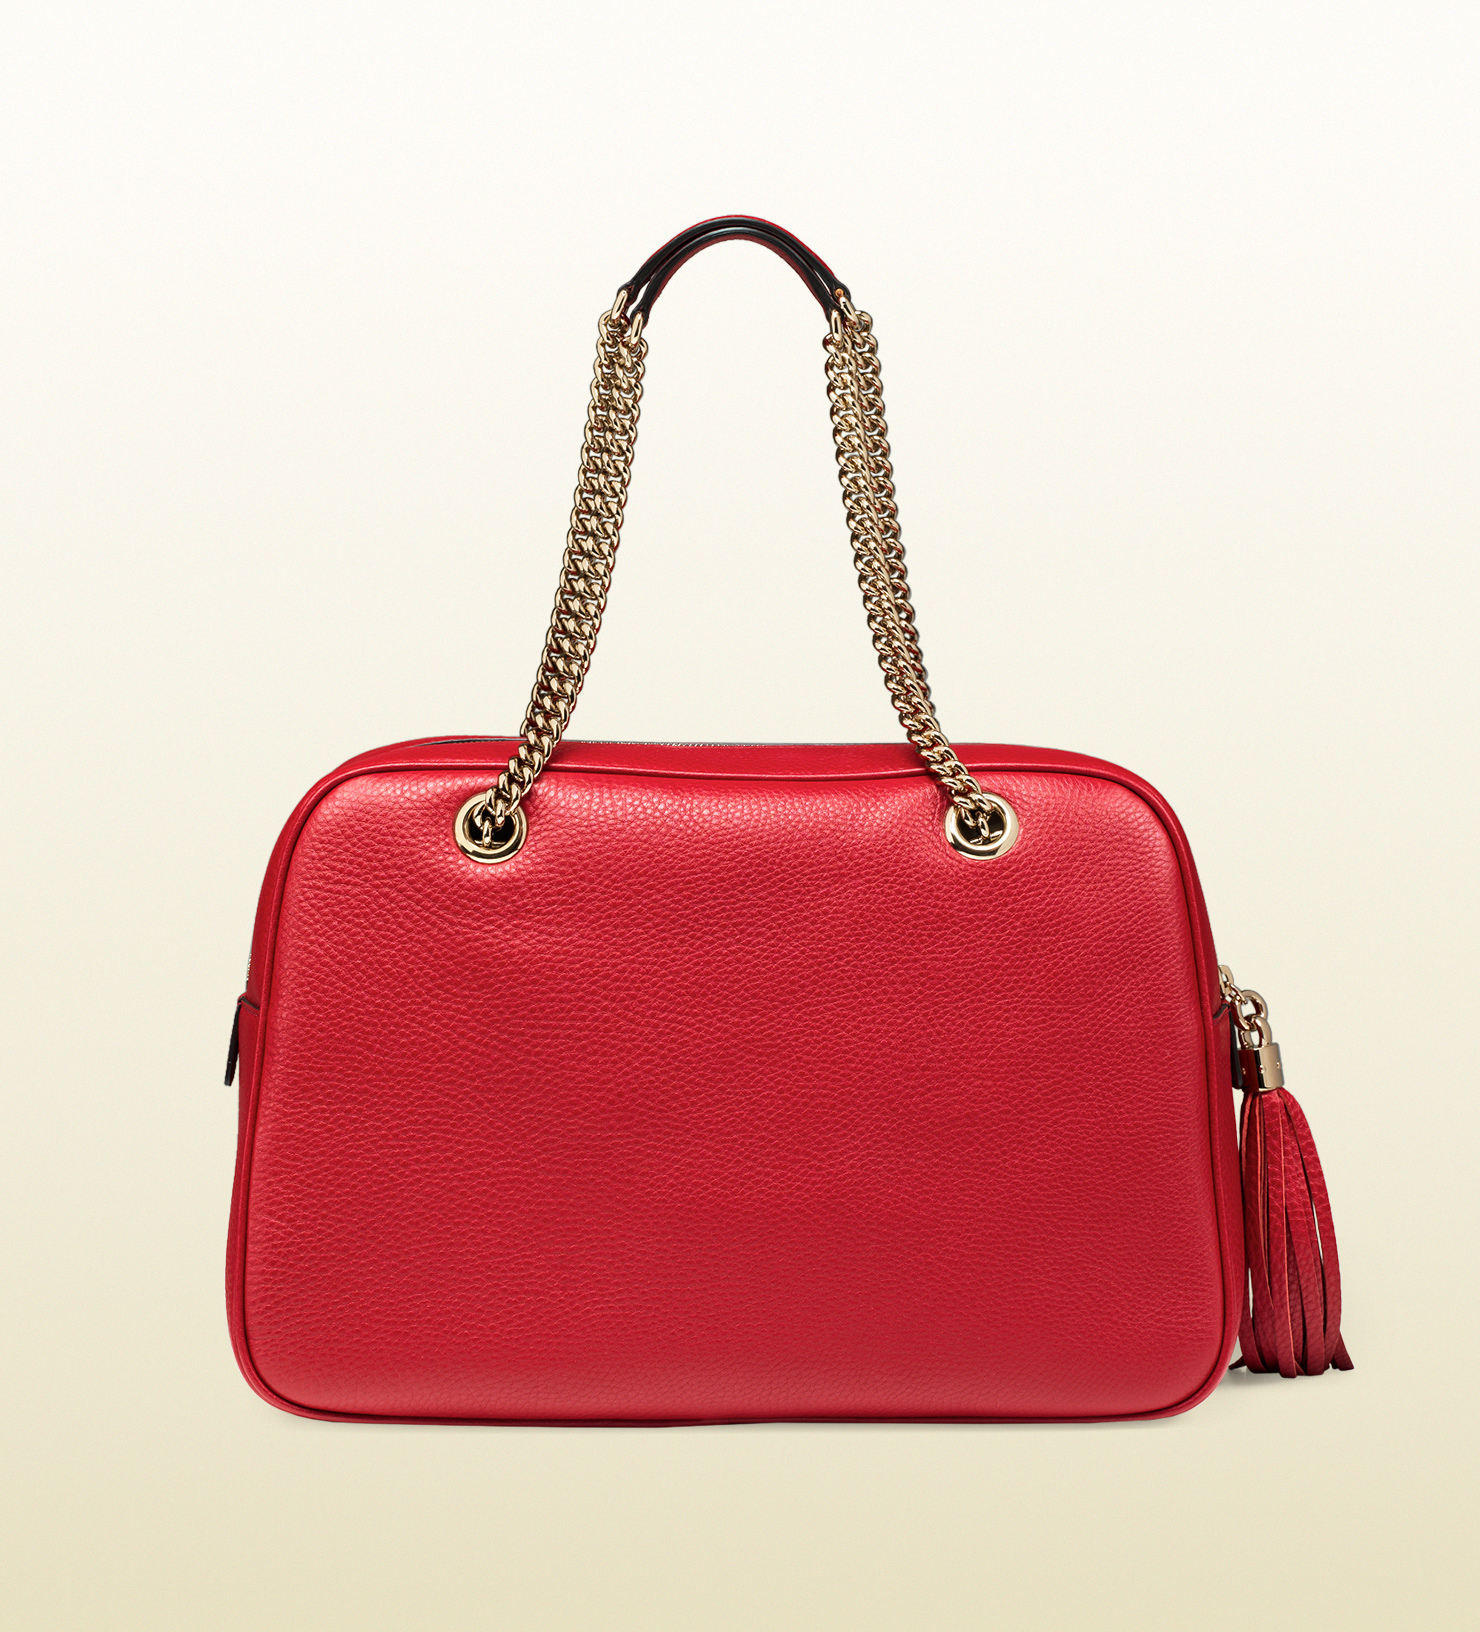 Gucci Soho Leather Chain Shoulder Bag in Red | Lyst